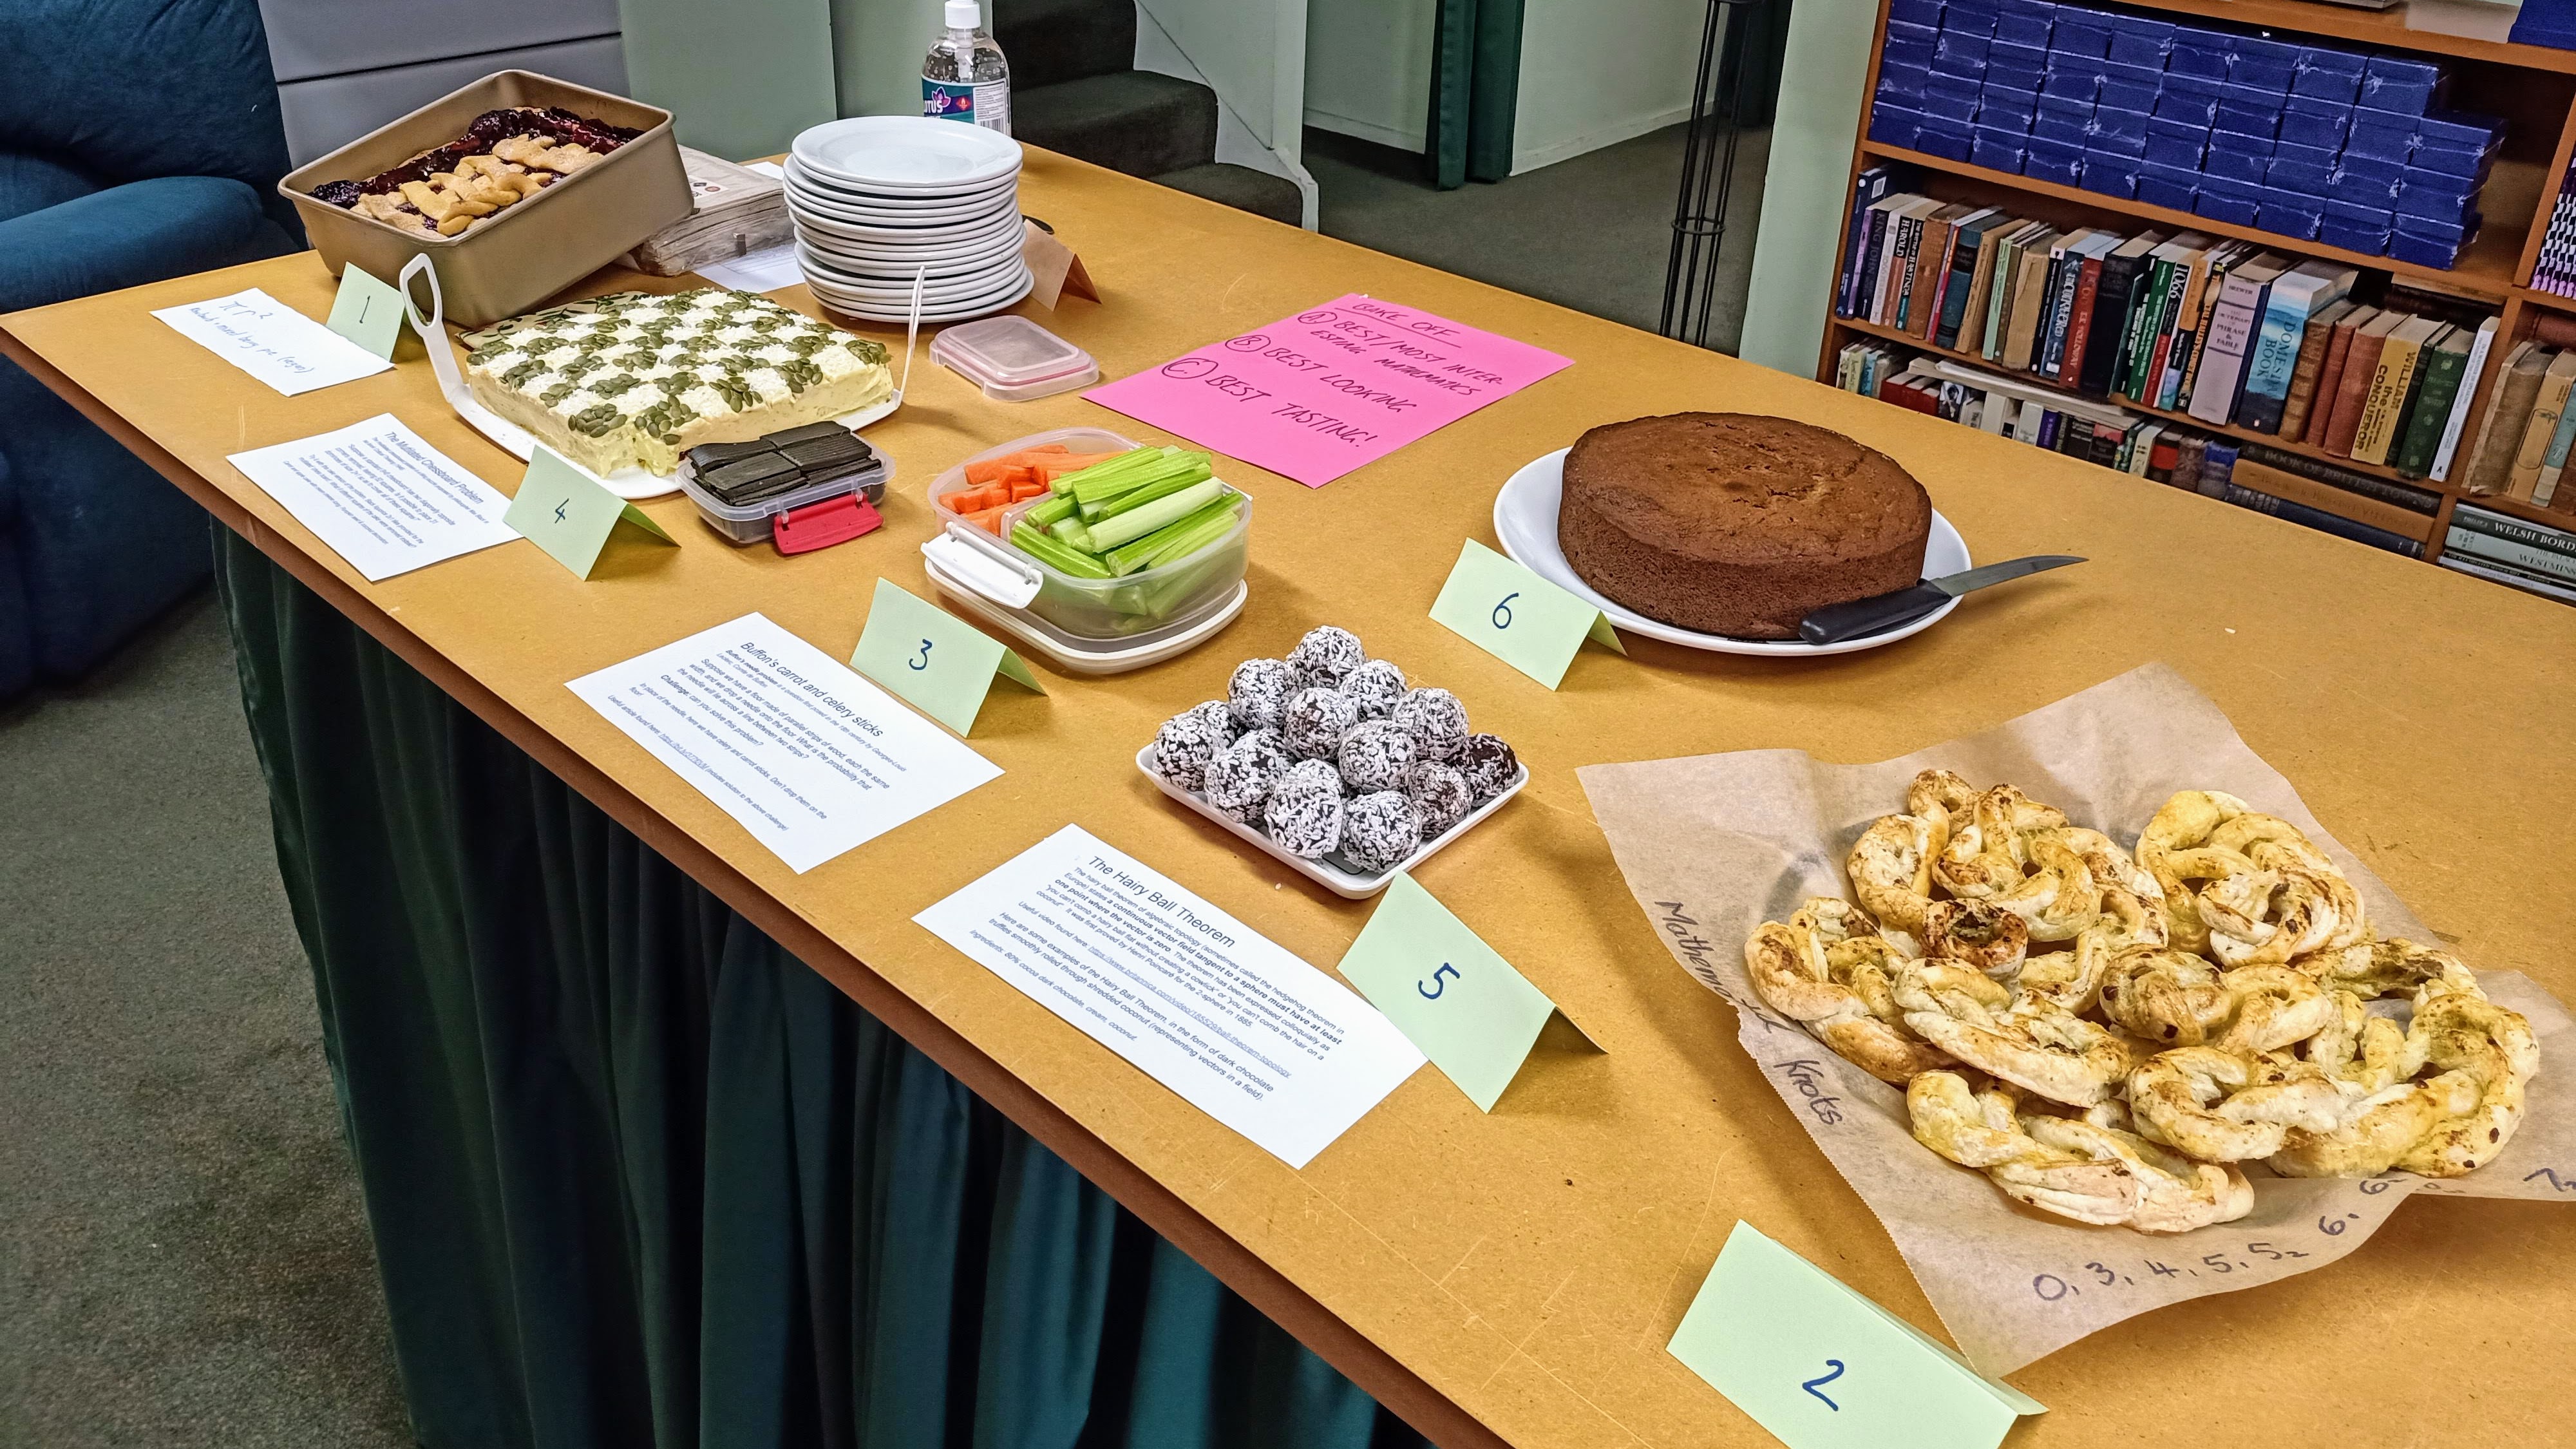 All the bakeoff entries before being judged and devoured by a hungry horde of recreational mathematicians